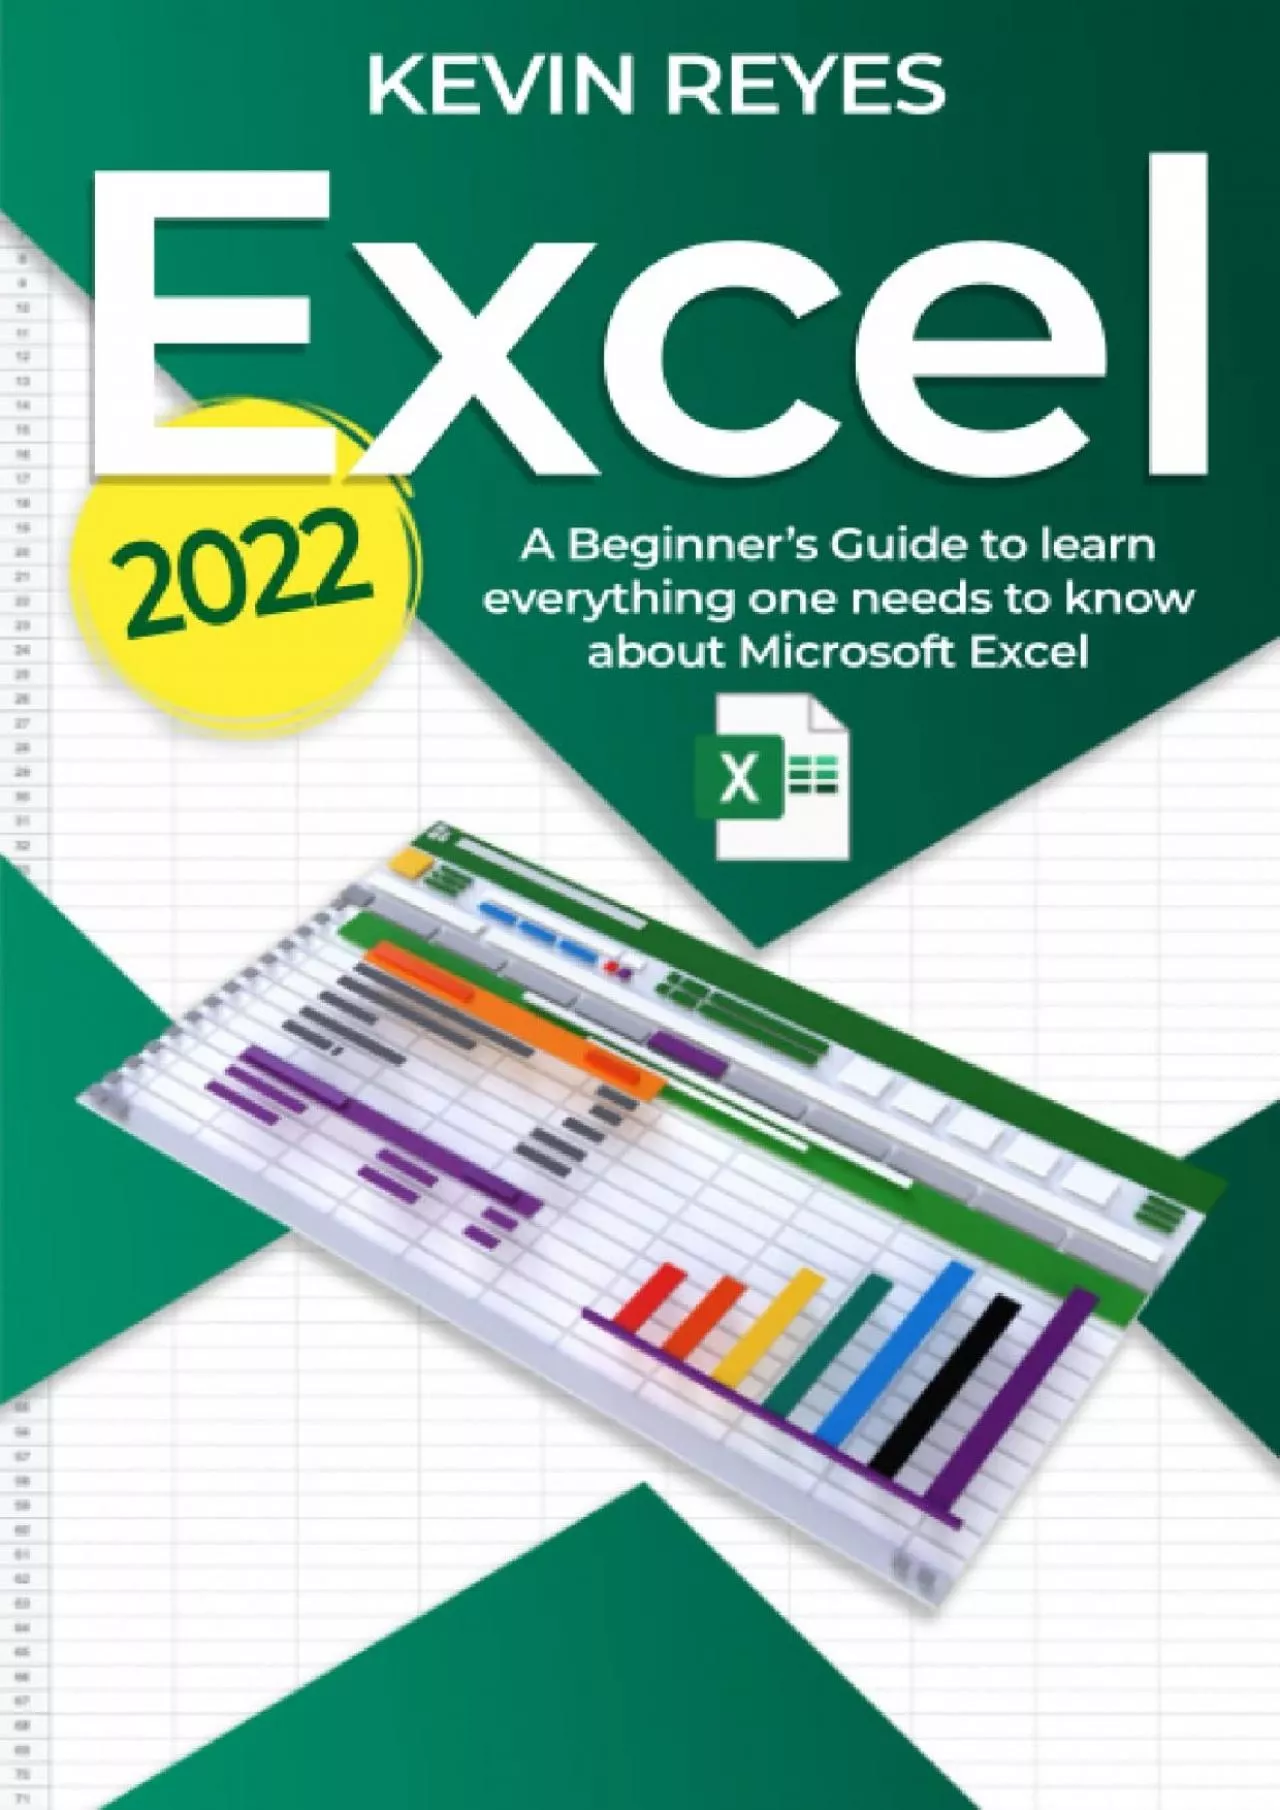 (BOOK)-Excel 2022: A Beginner’s Guide to learn everything one needs to know about Microsoft